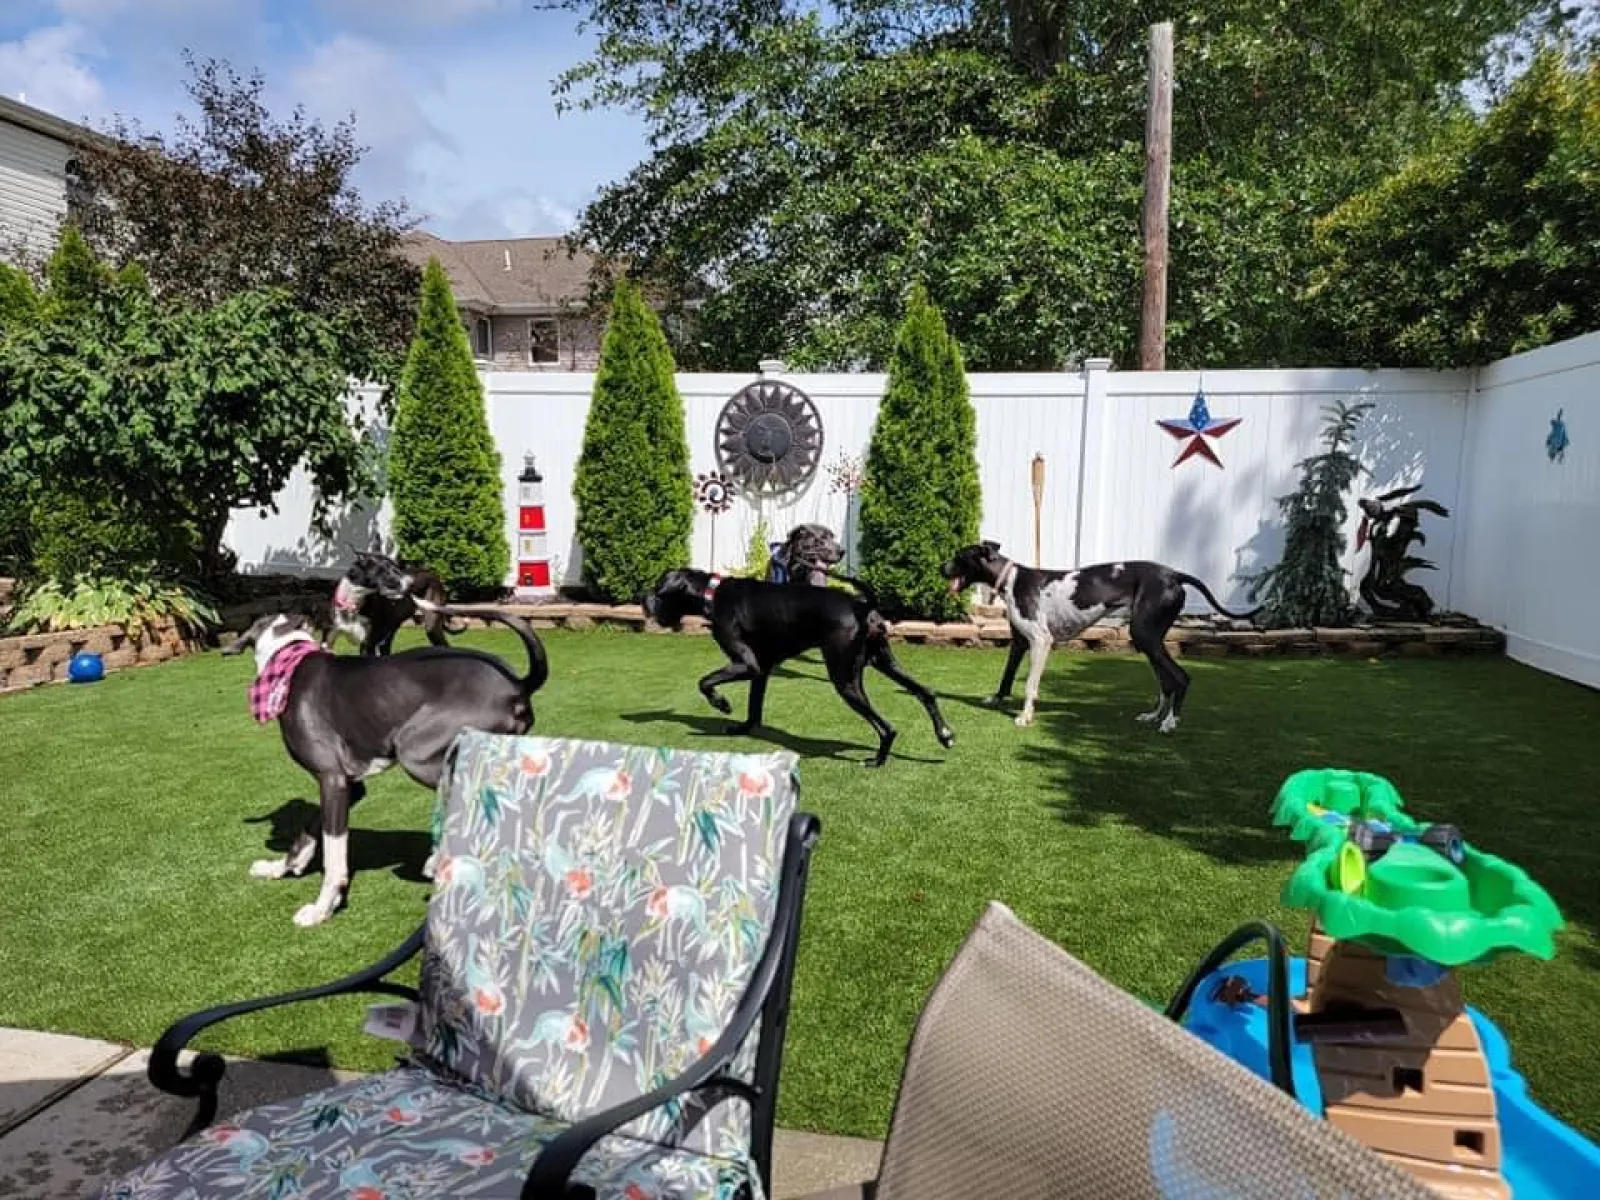 a group of dogs in a yard